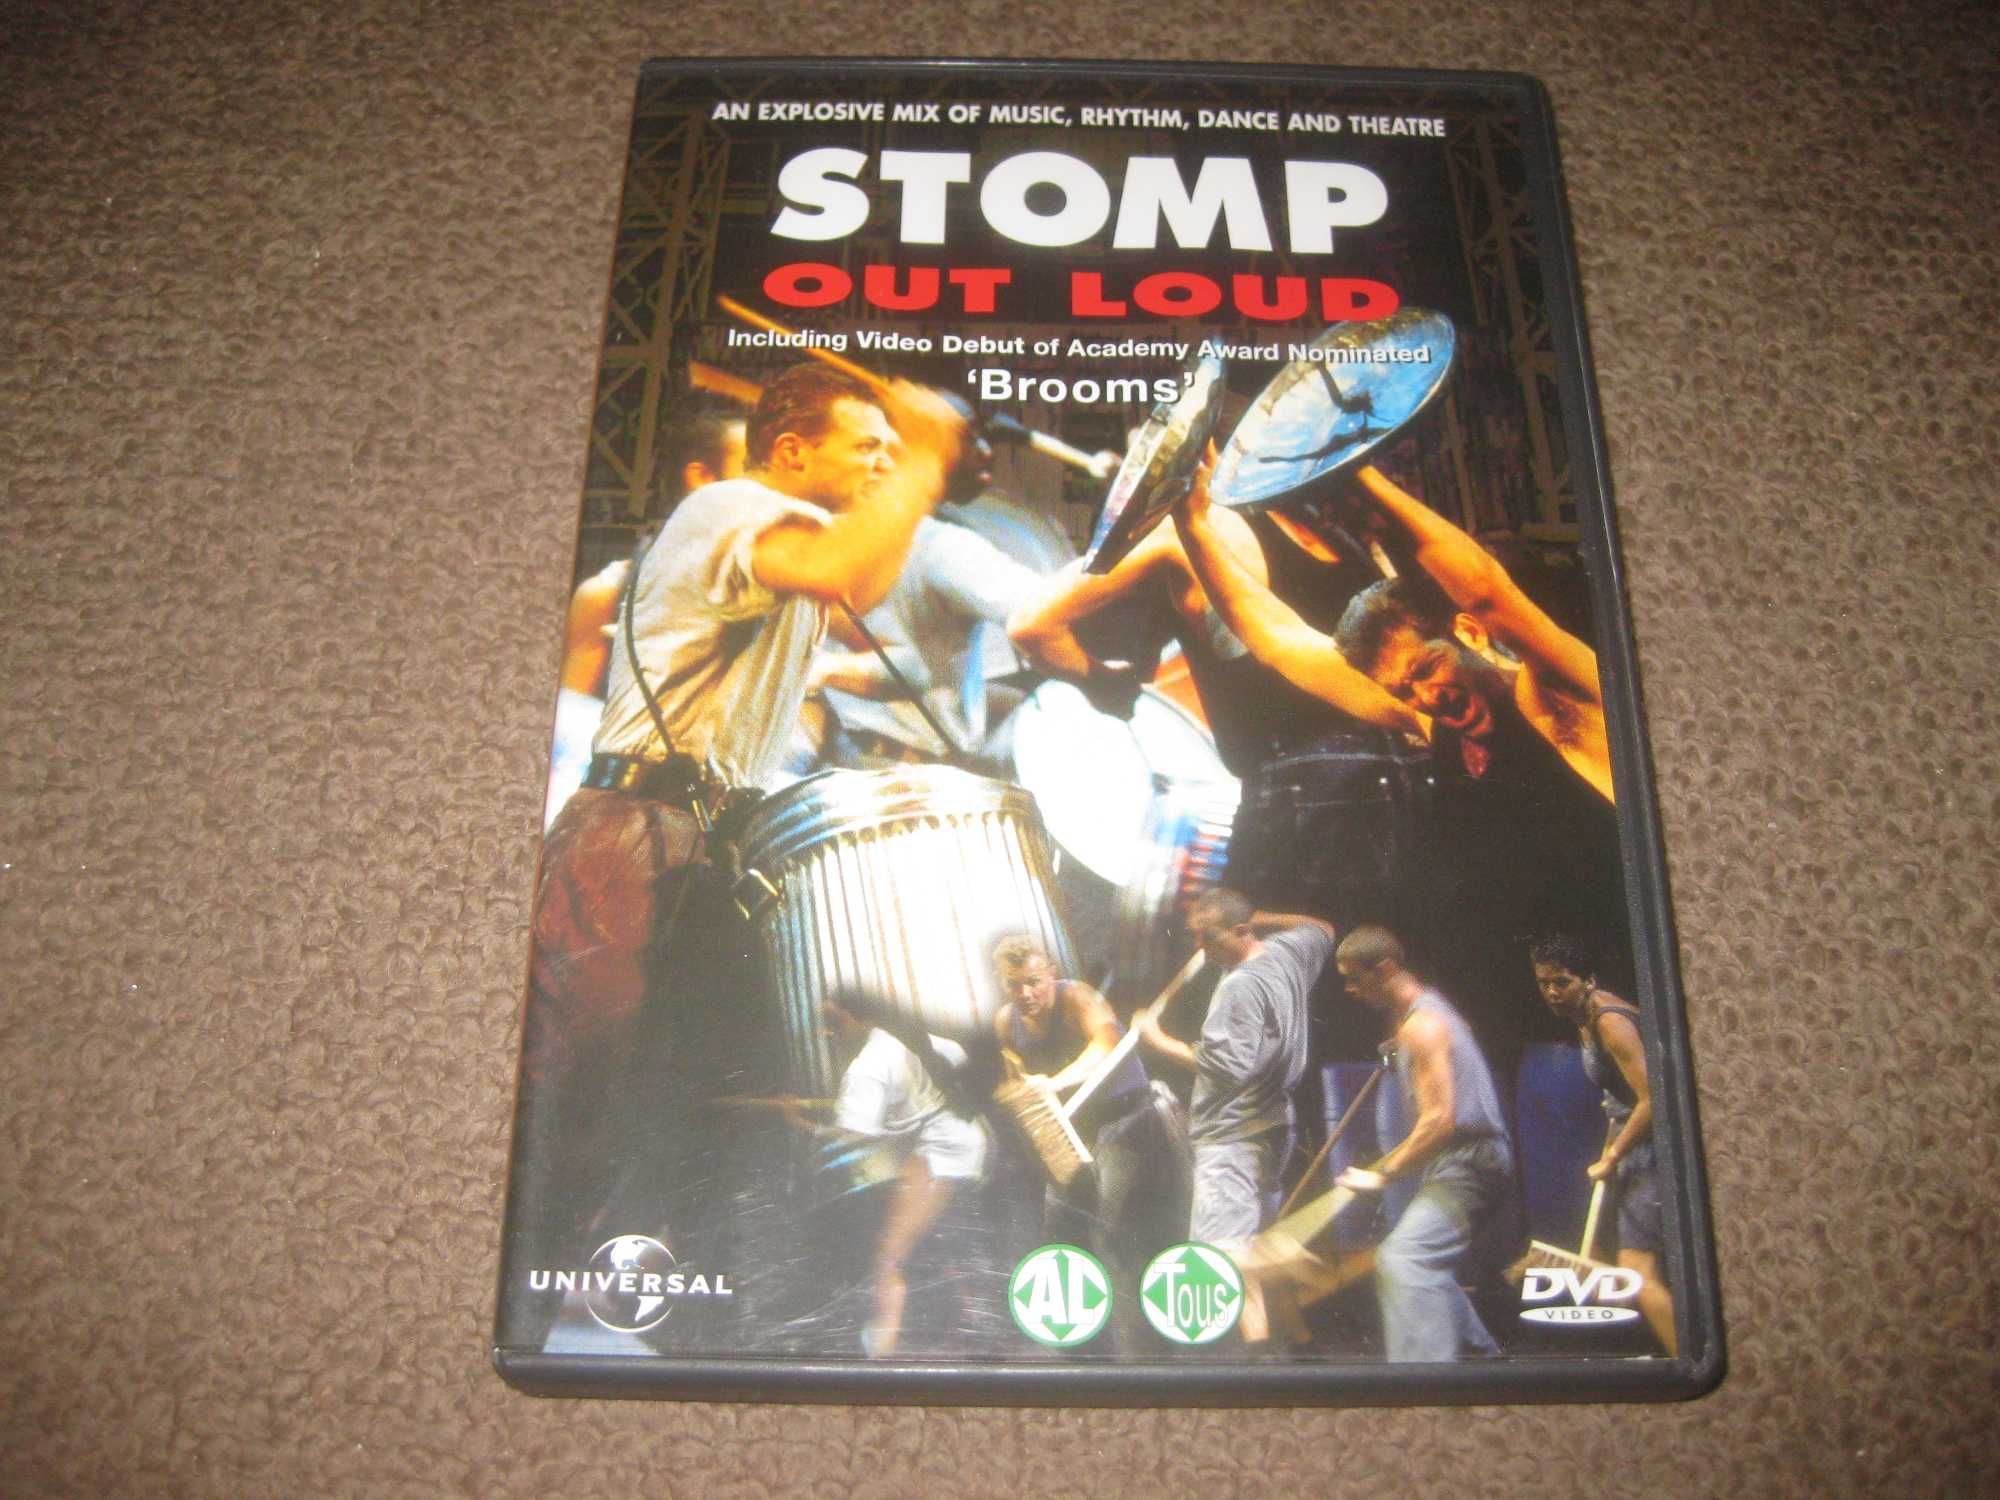 DVD dos Stomp "Out Loud"